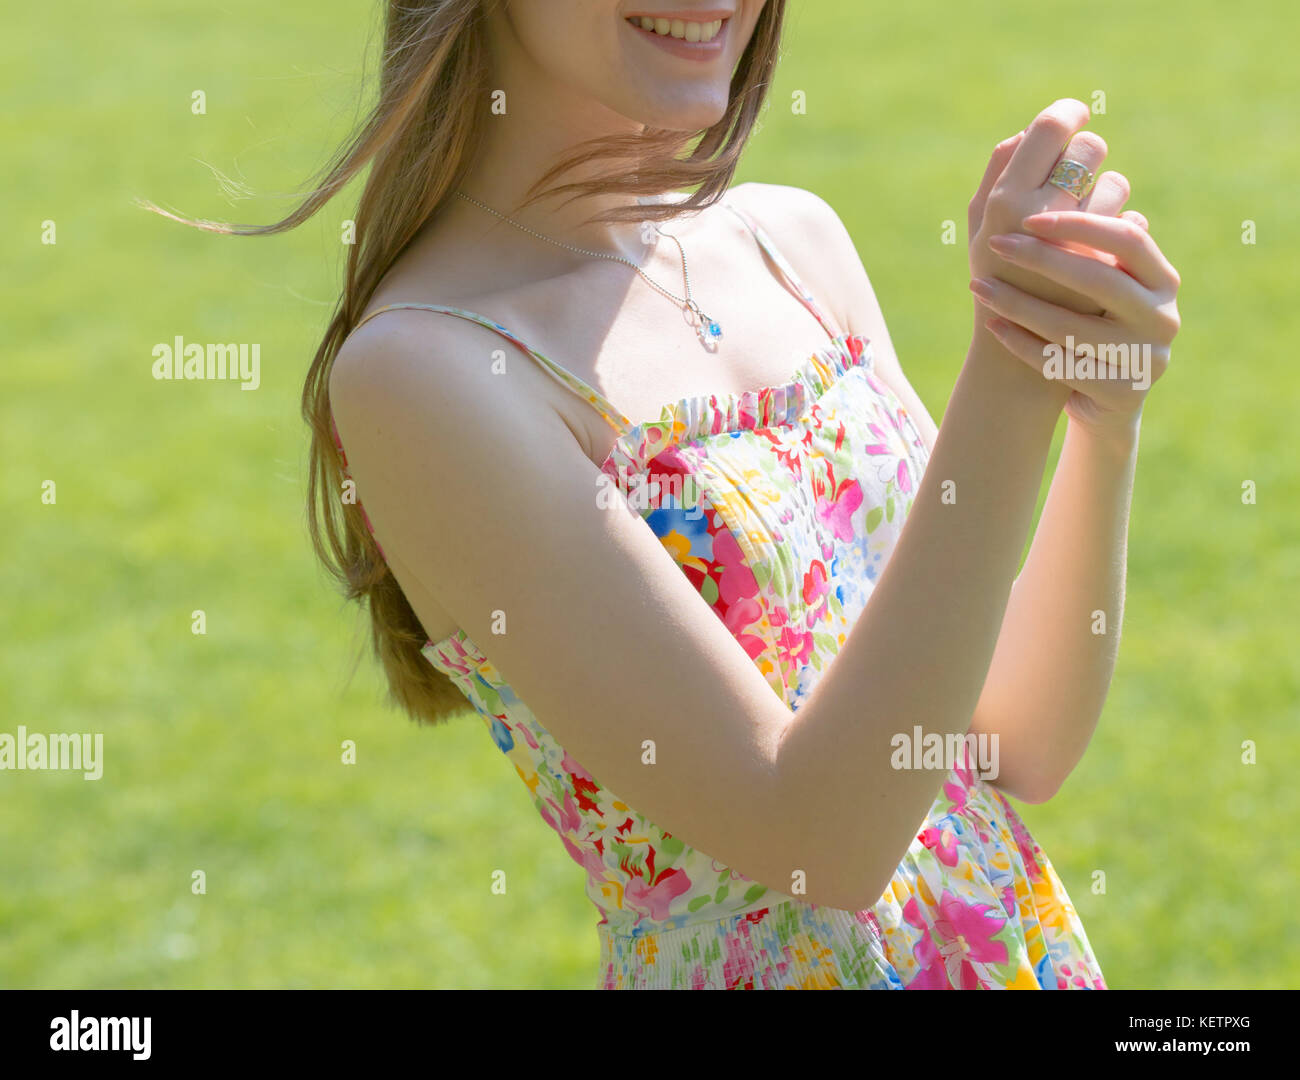 Portrait of young Beautiful woman with long hair wearing flower dress in green spring park Banque D'Images